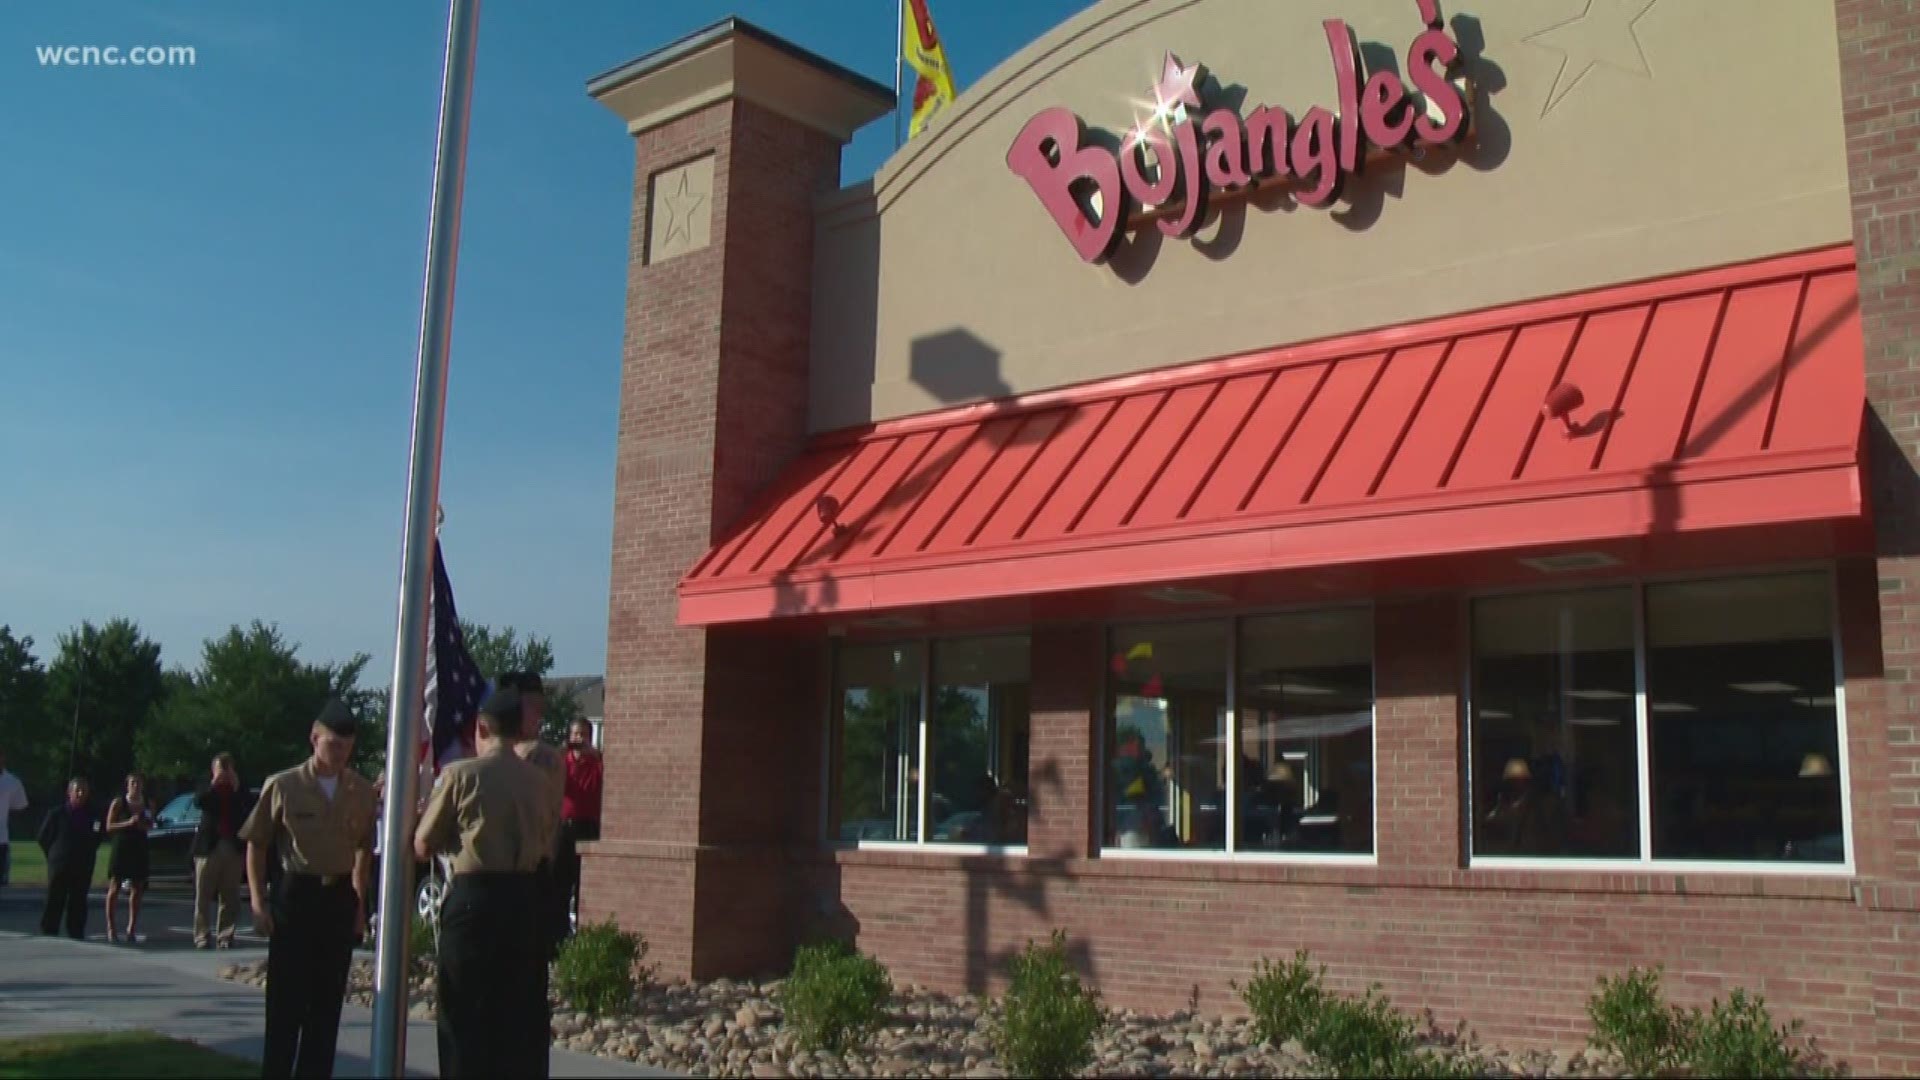 Charlotte fast food chain Bojangles' announced Tuesday that it will be sold to a pair of New York firms as part of an all-cash, $593 million deal.